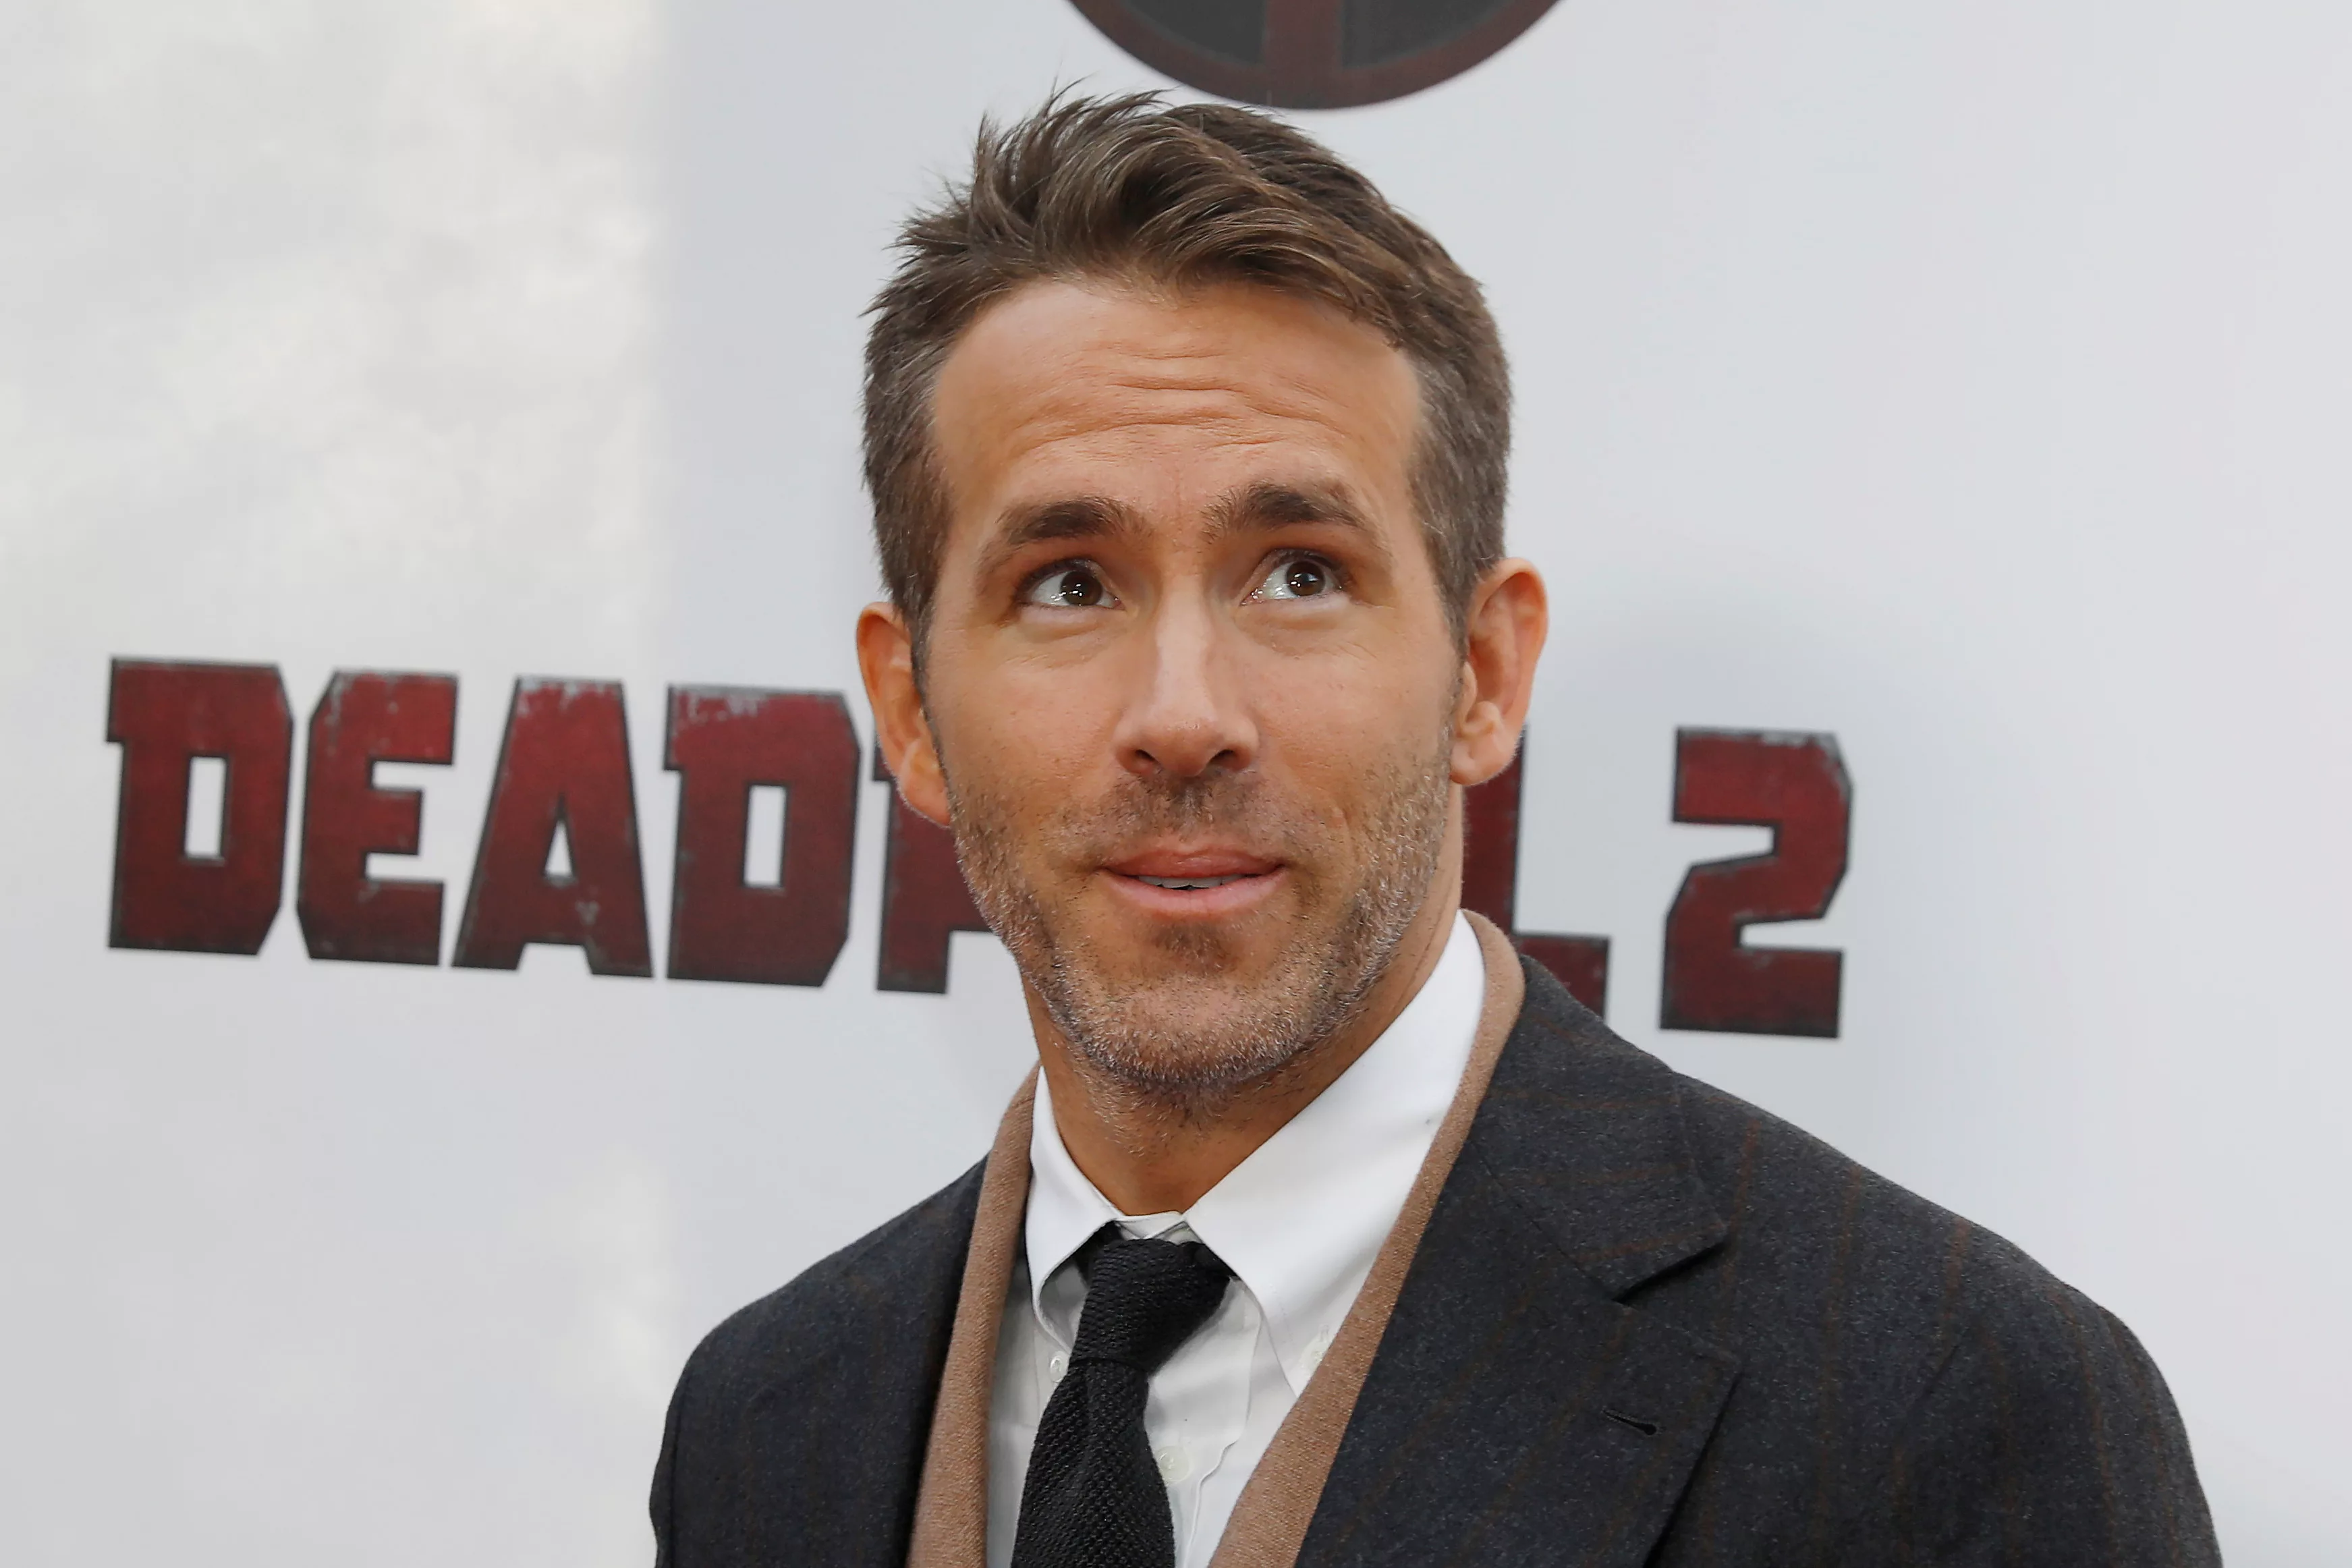 file-photo-actor-ryan-reynolds-poses-on-the-red-carpet-during-the-premiere-of-deadpool-2-in-manhattan-new-york